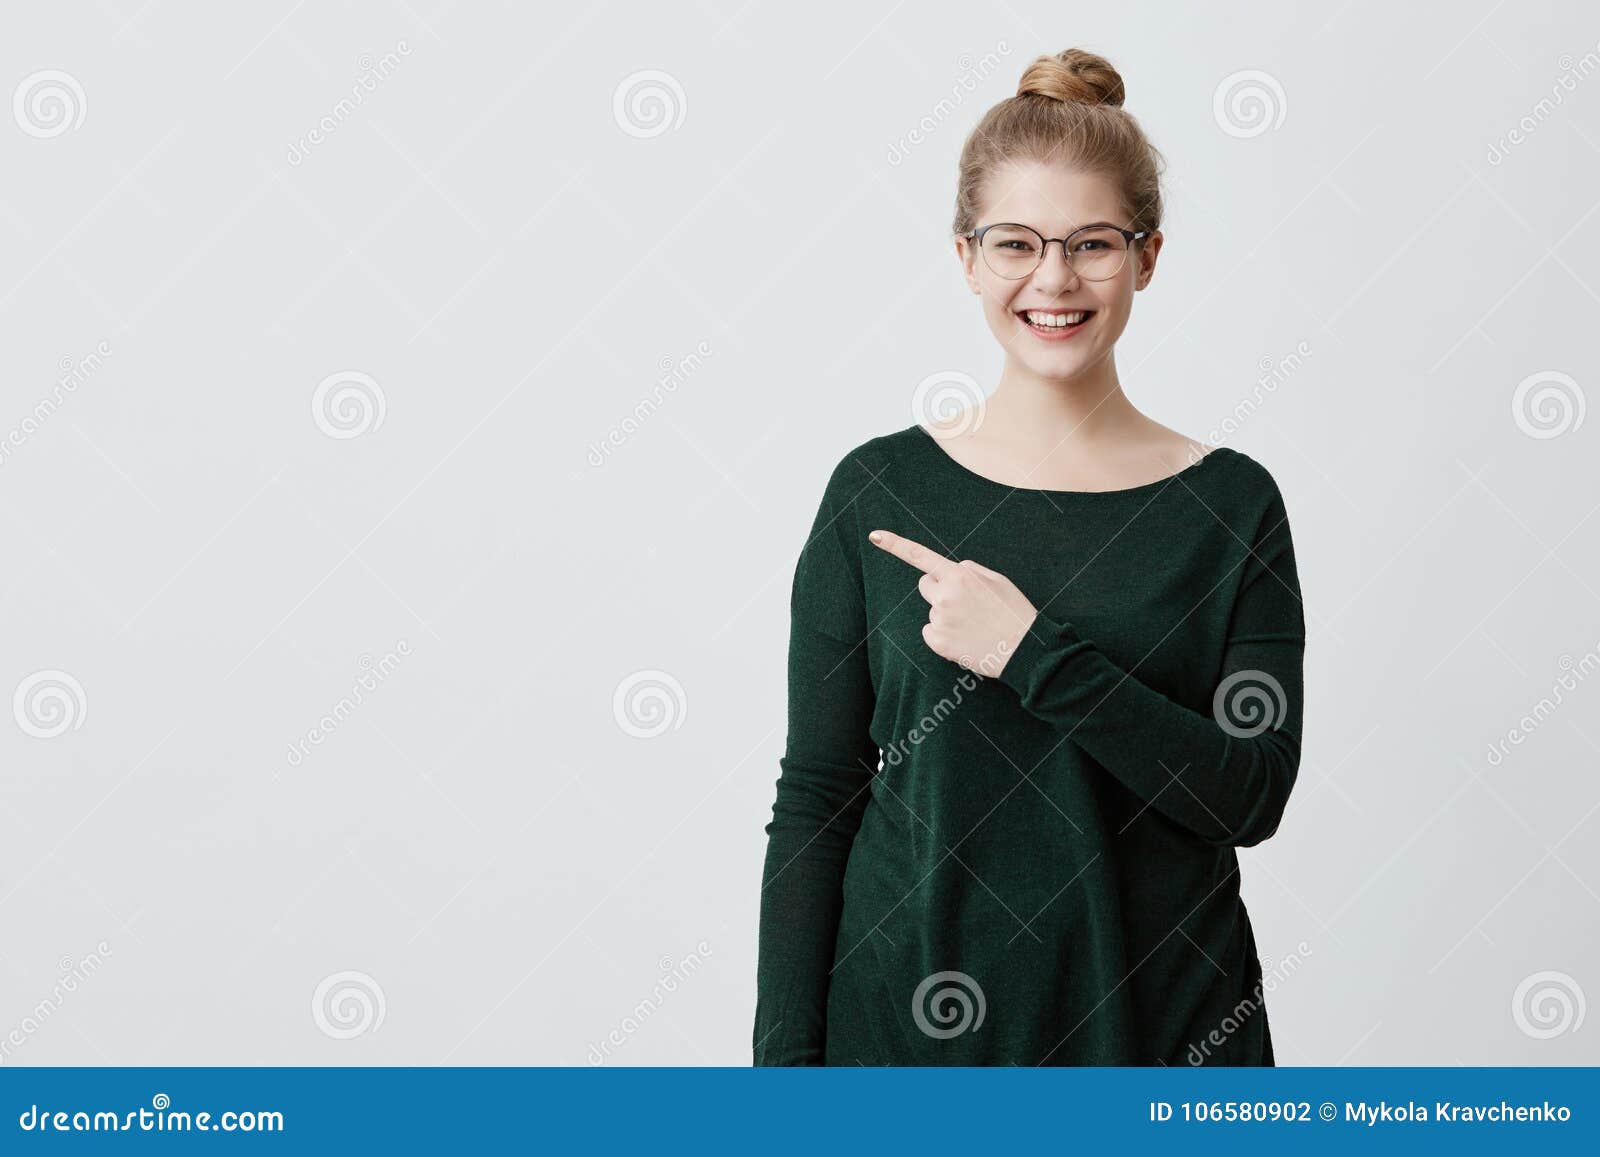 advertisment concept. young lady with blonde hair, stylish eyewear in green sweater and mirthful expression